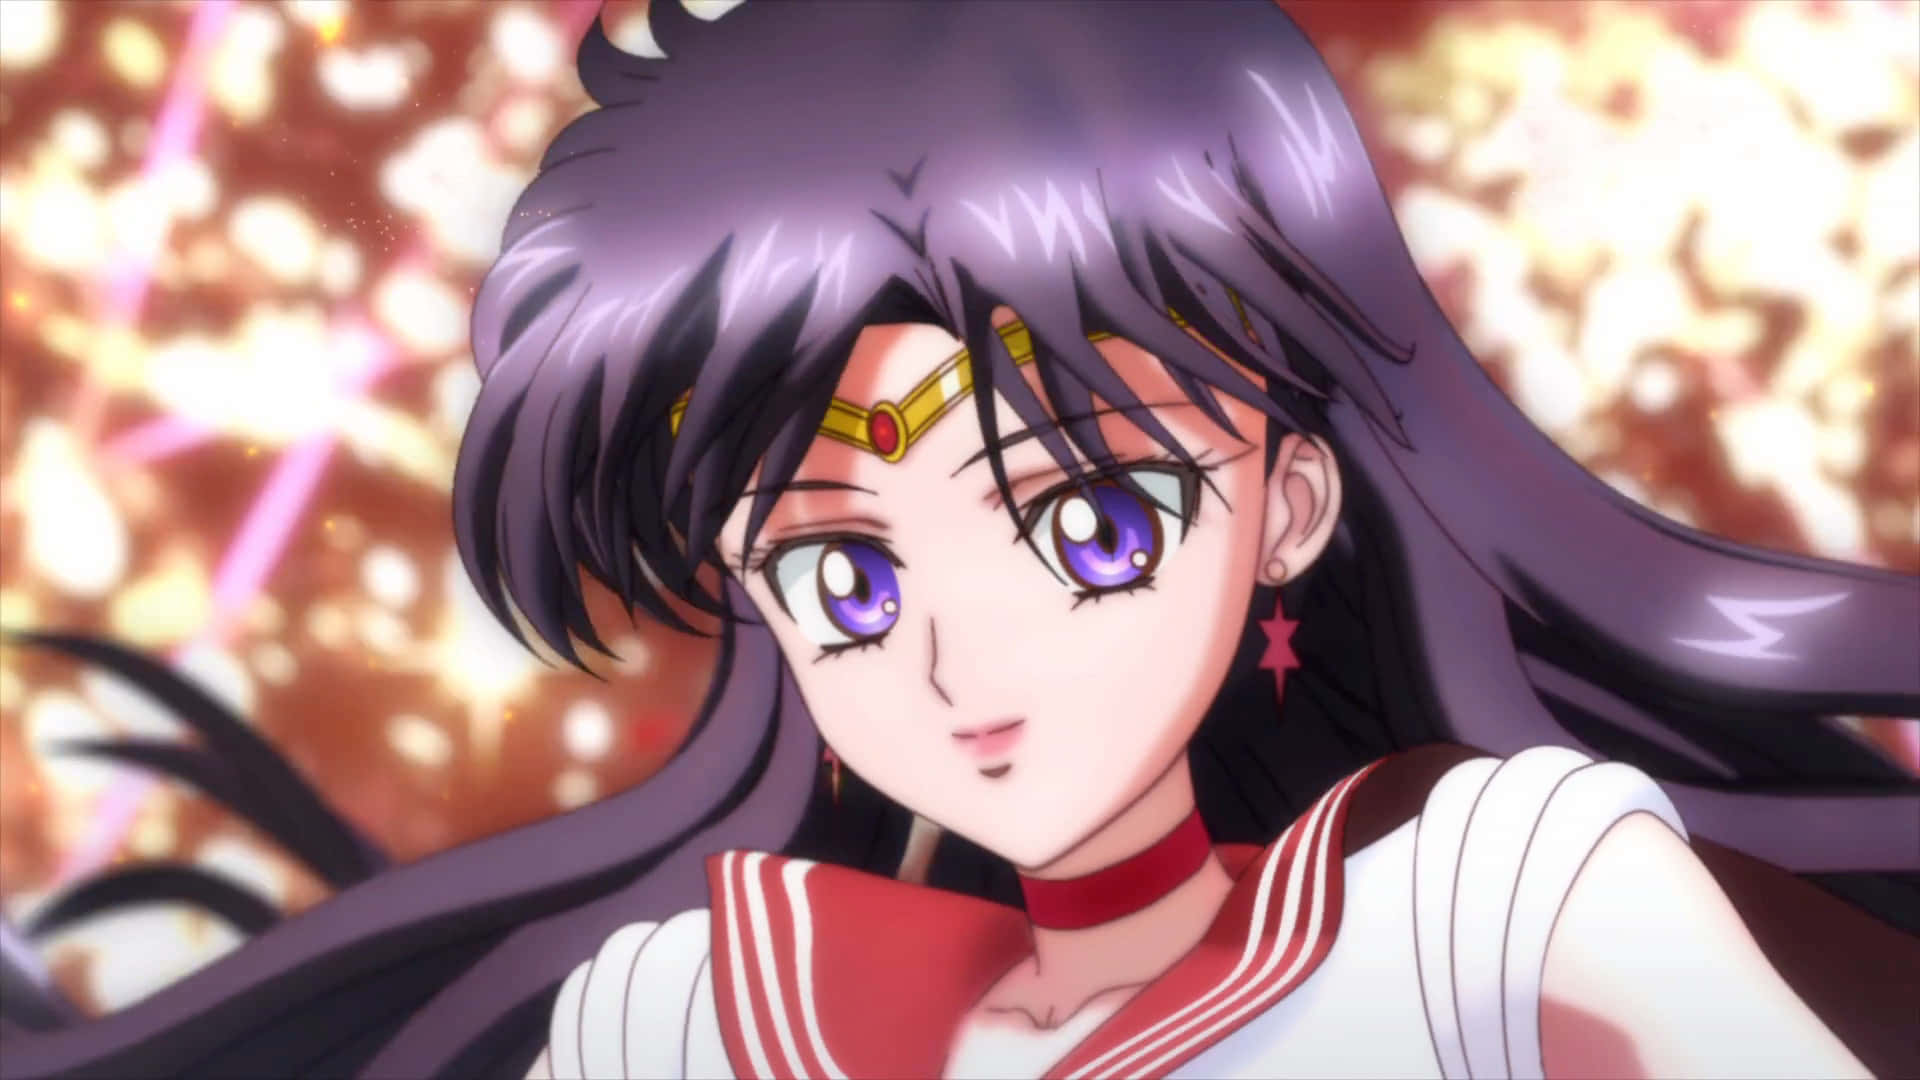 The Warrior Of Fire And Passion, Sailor Mars! Wallpaper